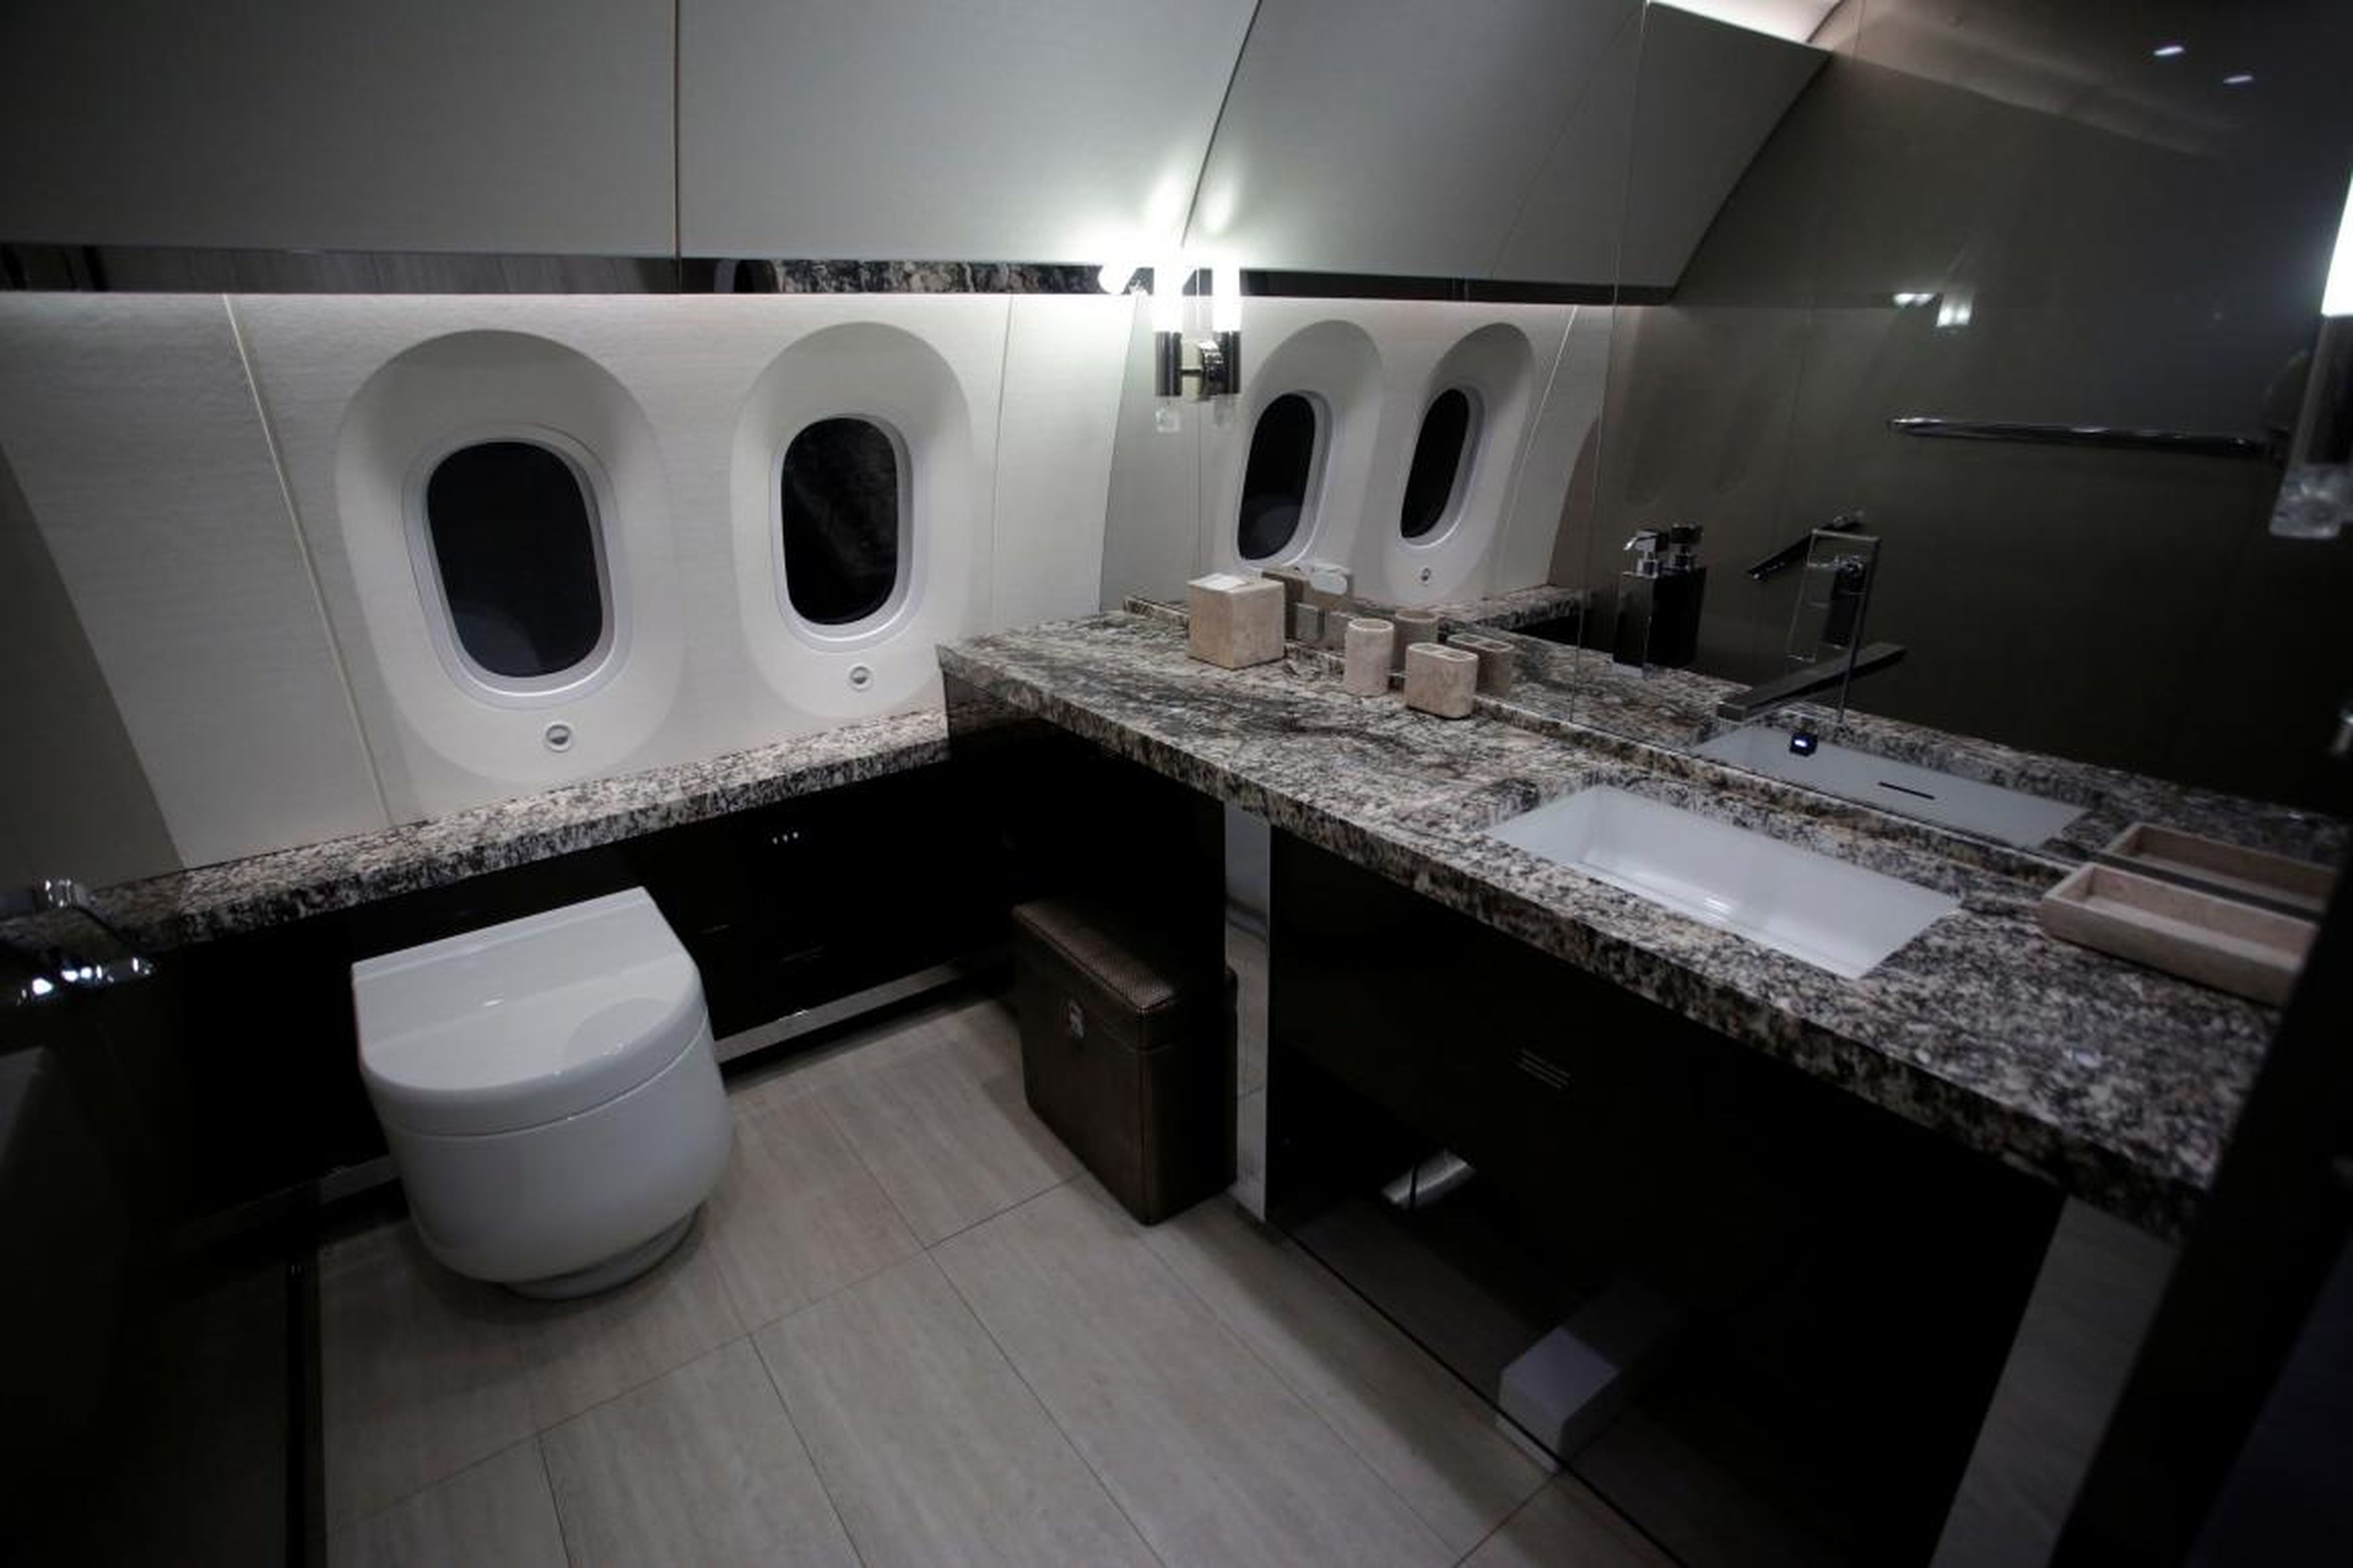 Here is a look at a restroom on the plane complete with stone countertops.